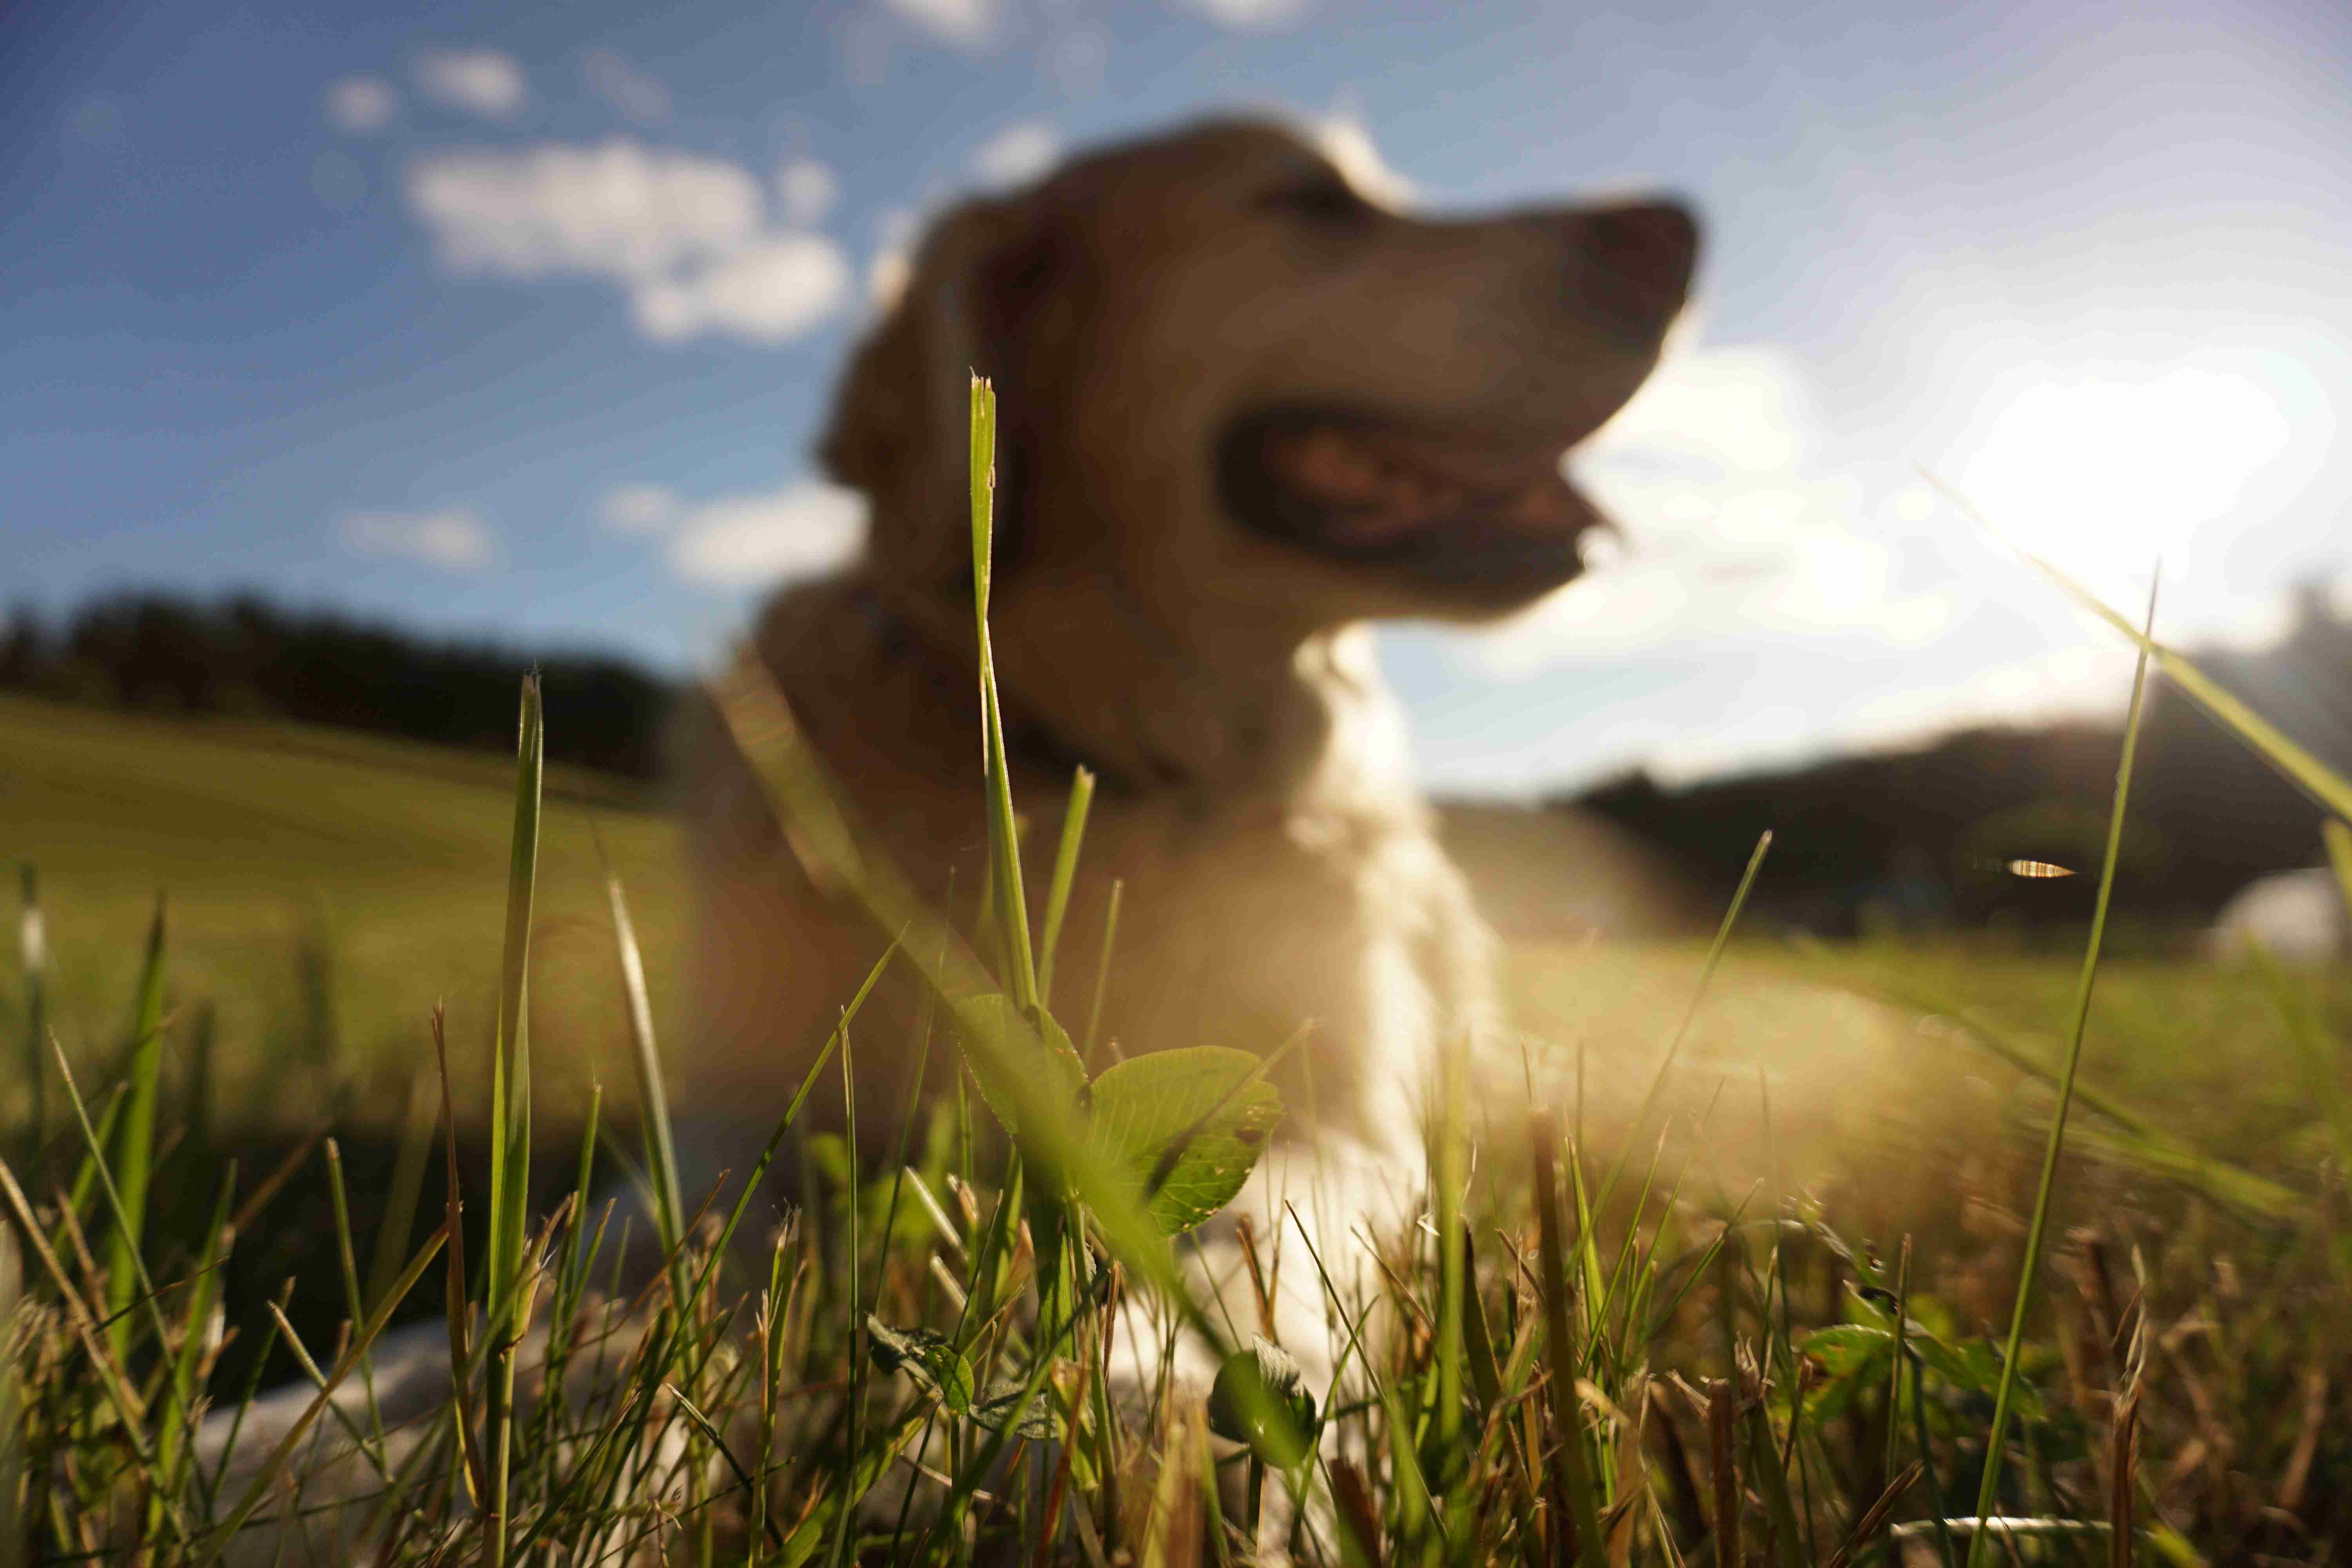 What are some signs that a Golden Retriever may be experiencing allergies?